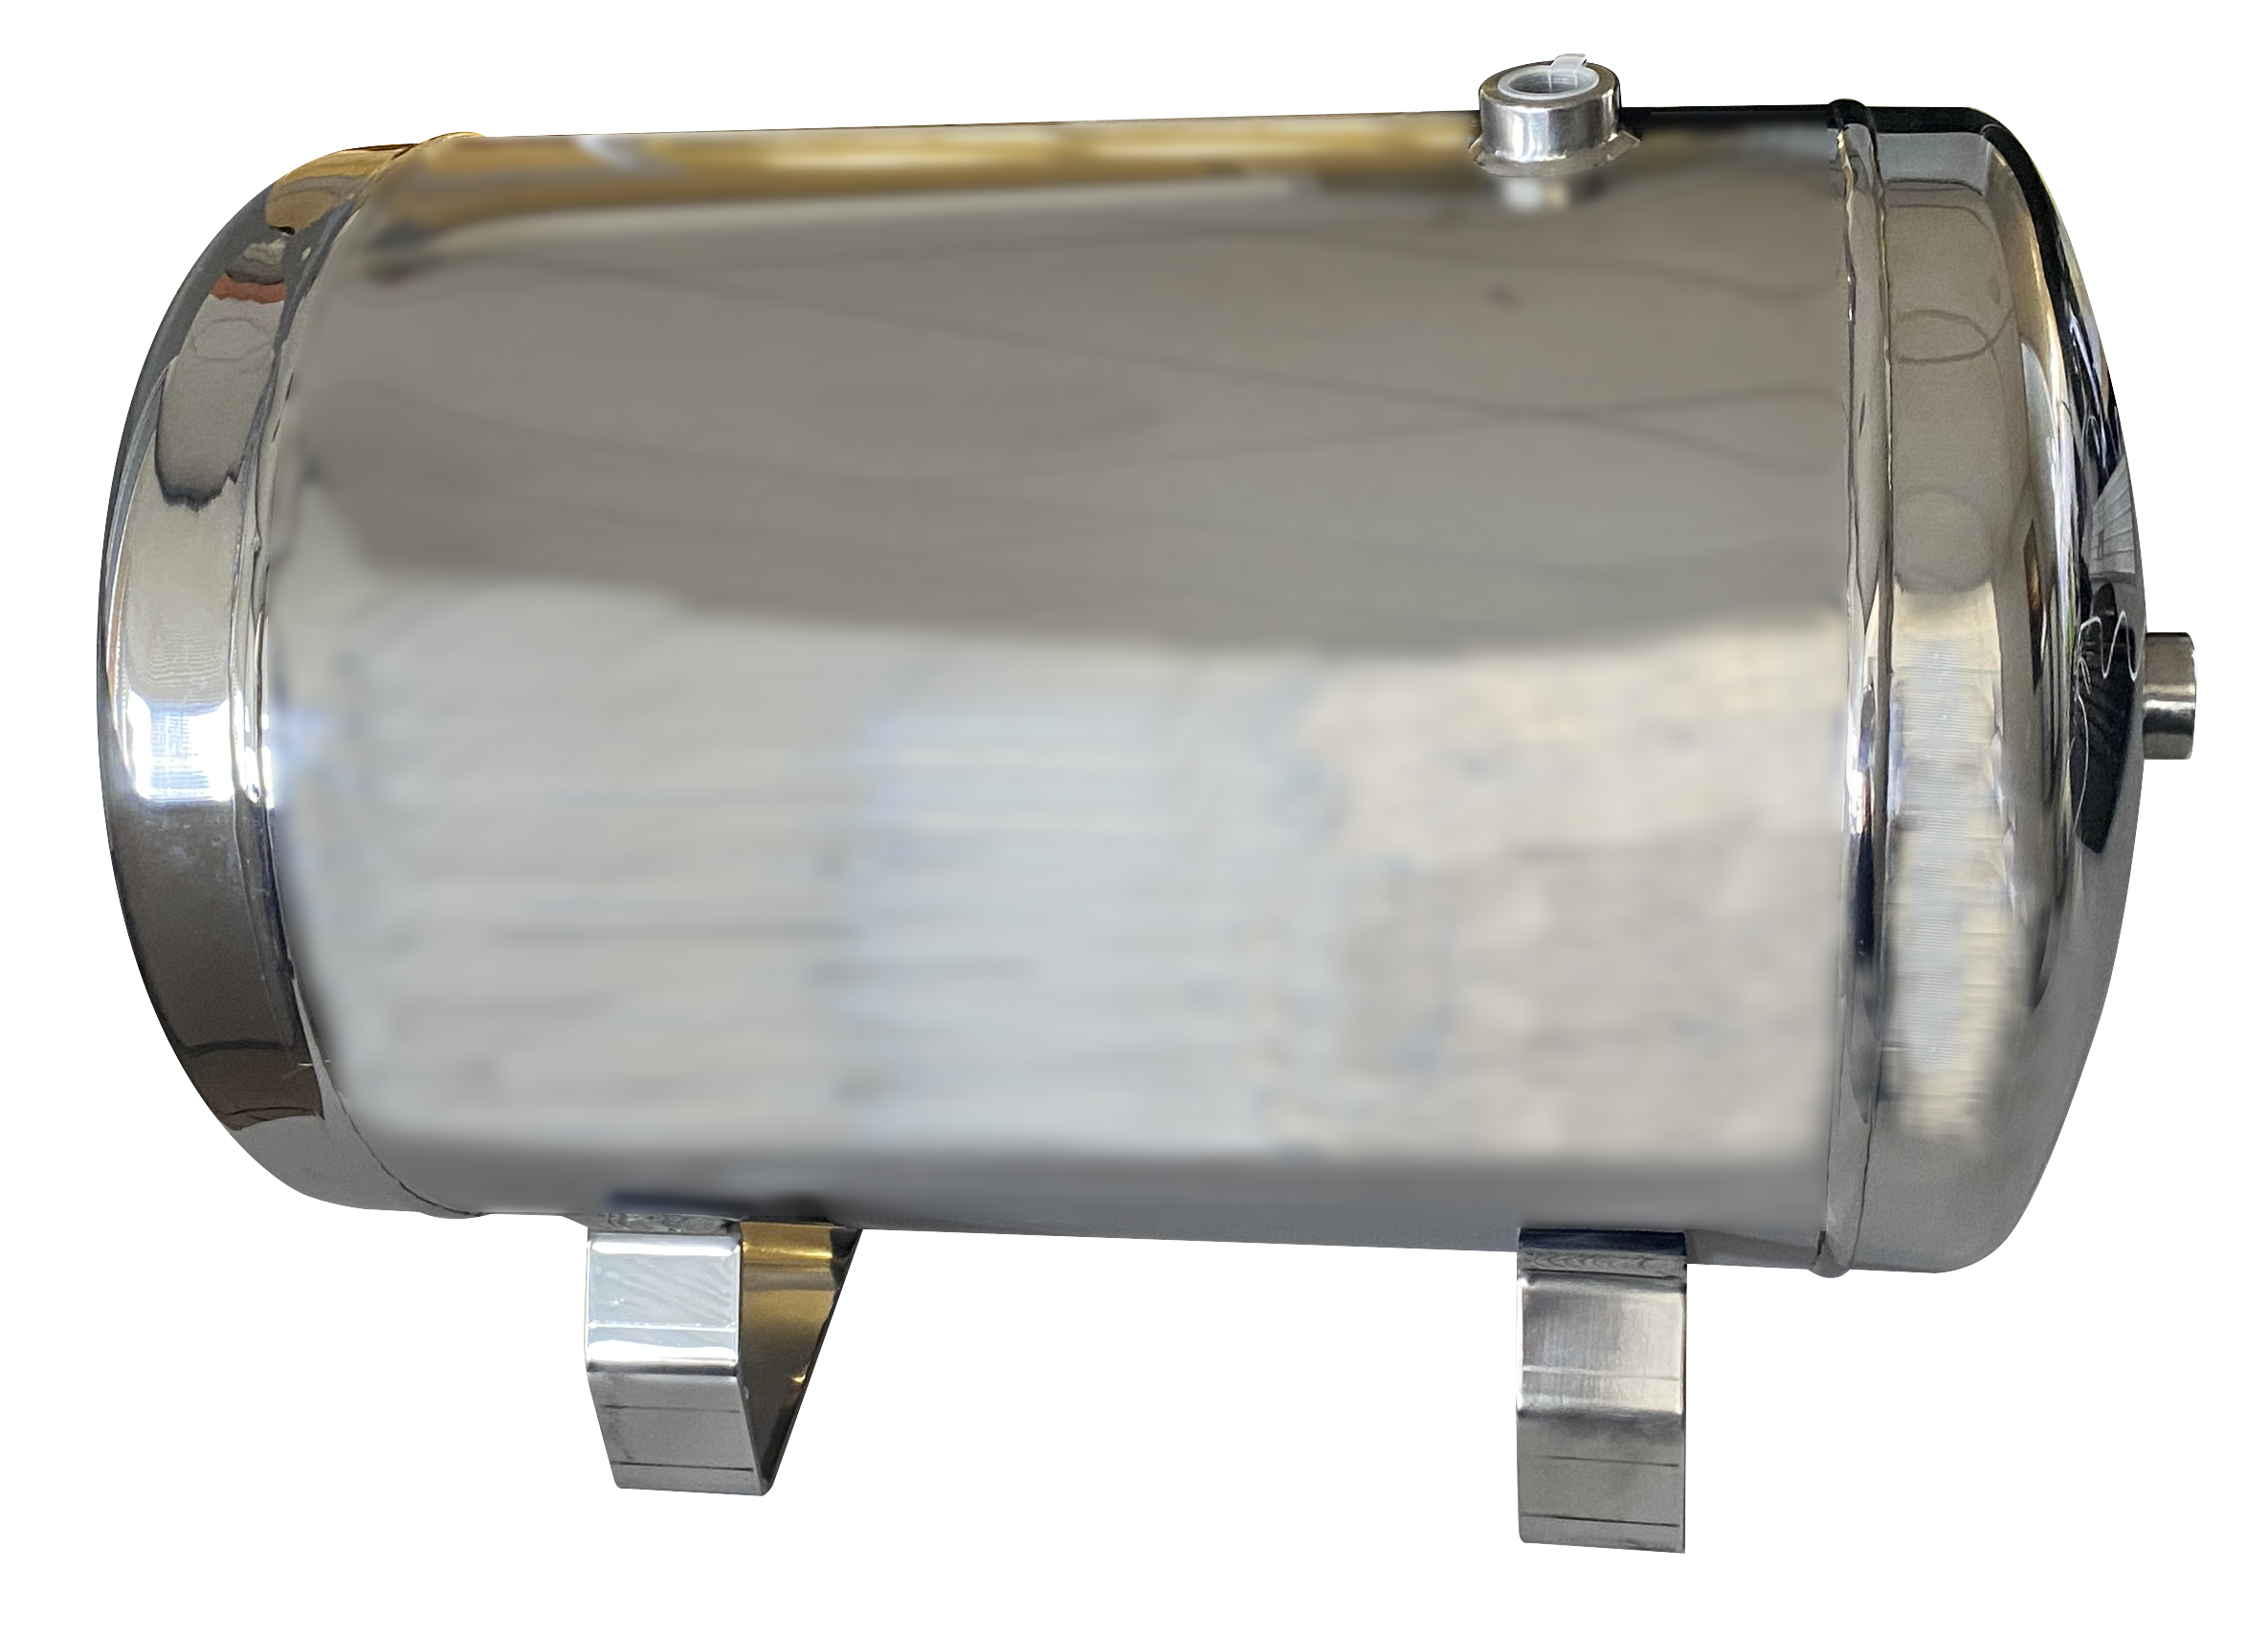 Compressed air tanks in polished stainless steel with feet